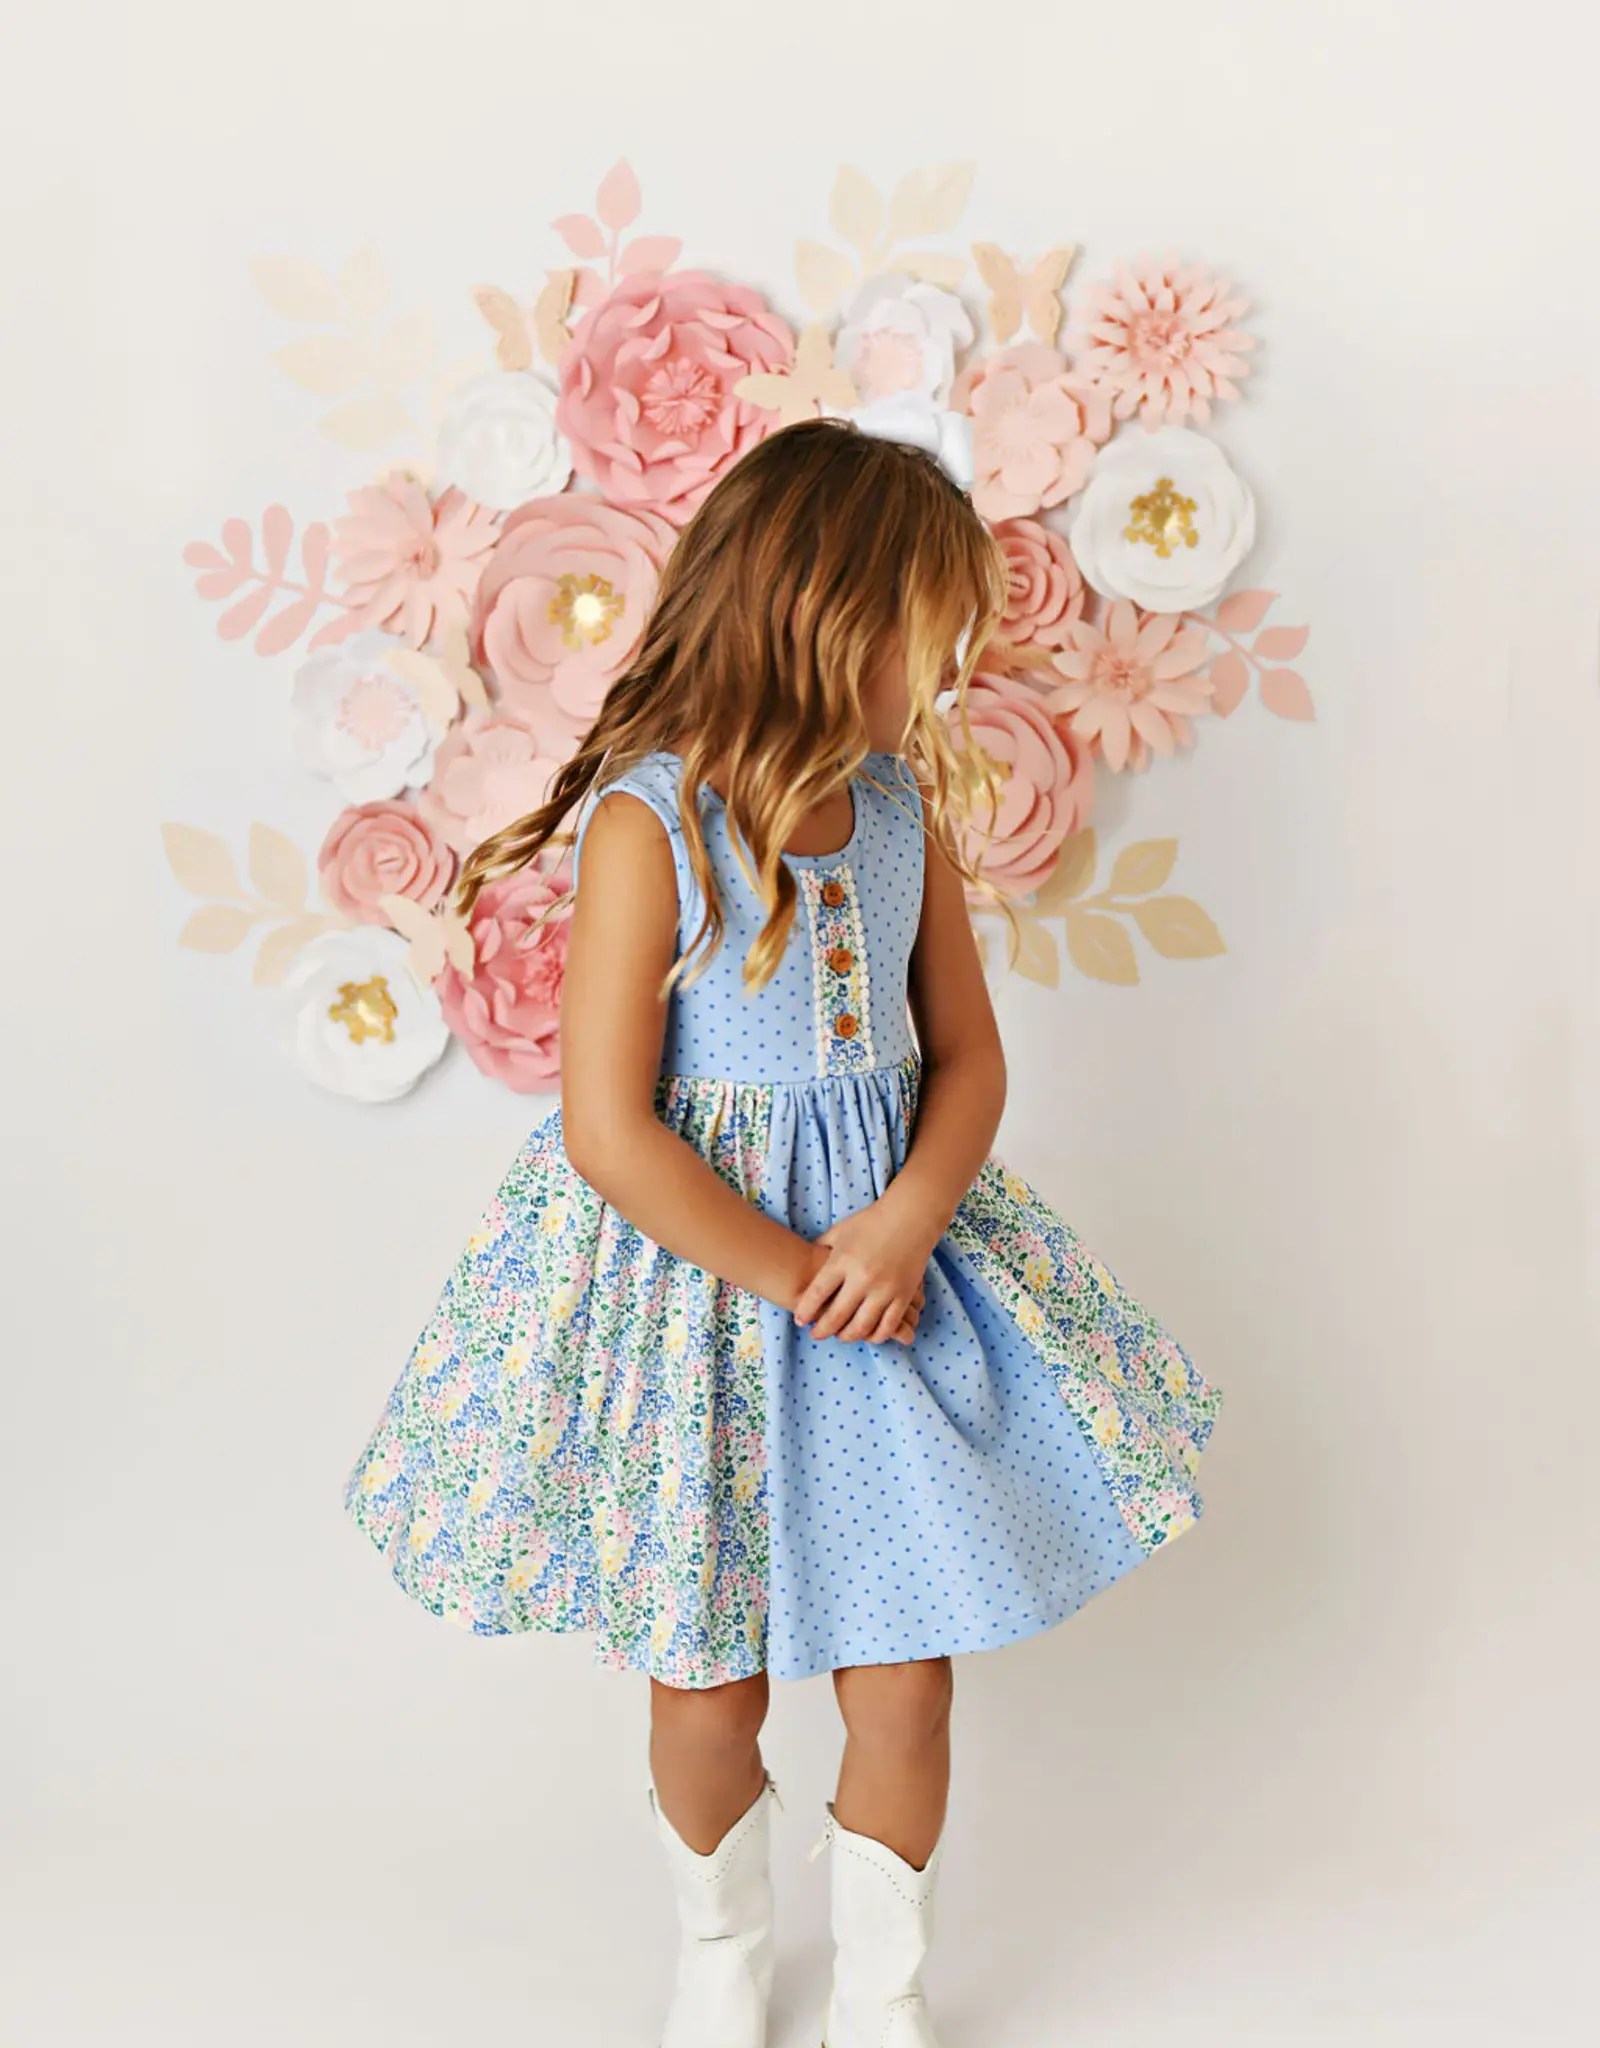 Swoon Baby 2412 Bliss Blue Floral Tier Dress